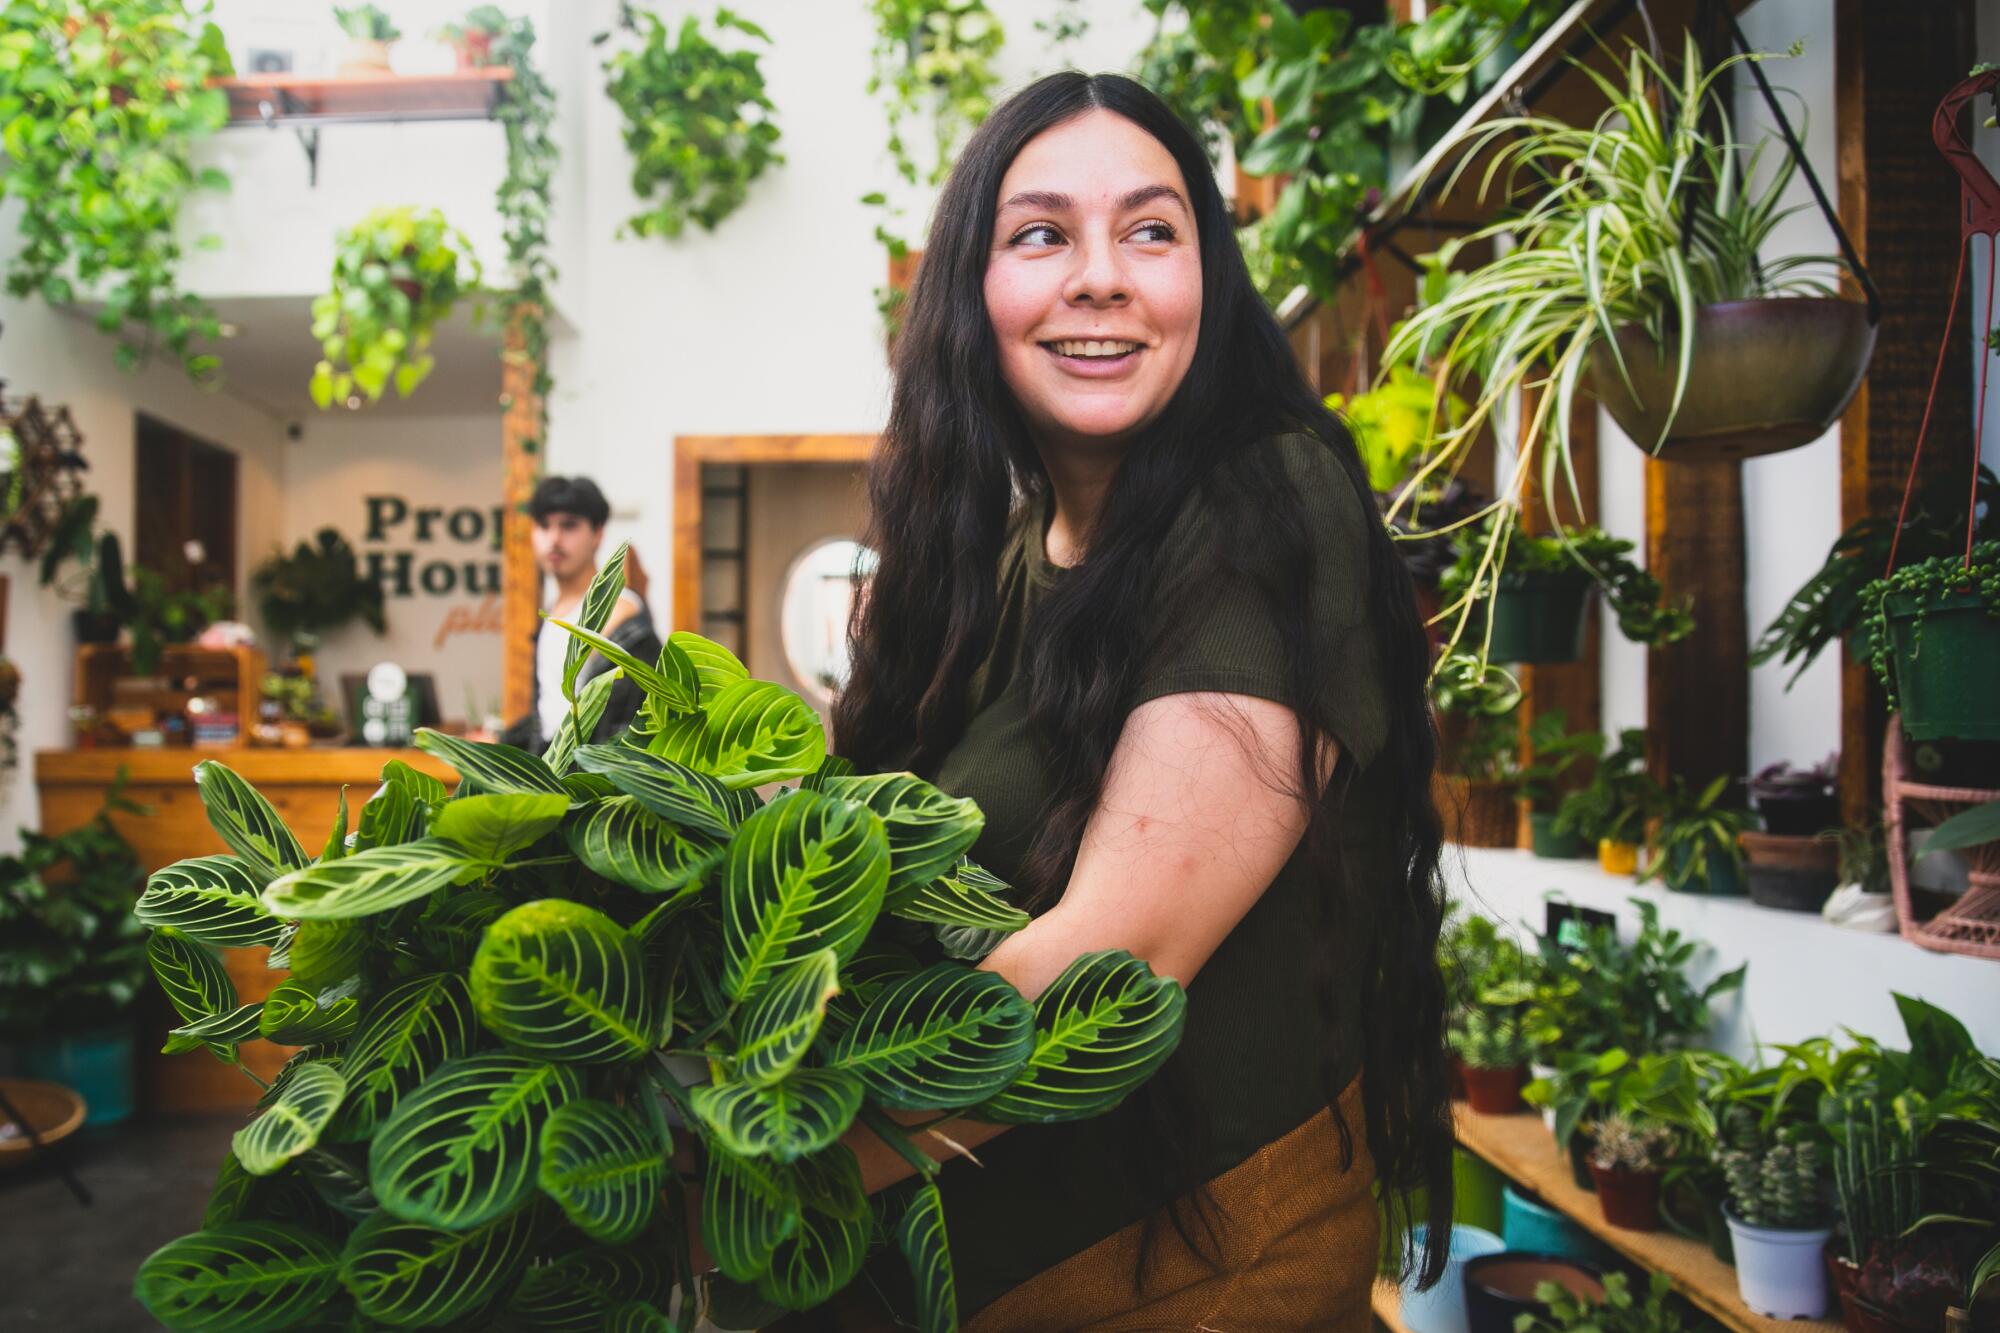 Young woman with long dark hair smiling holding a green plant.